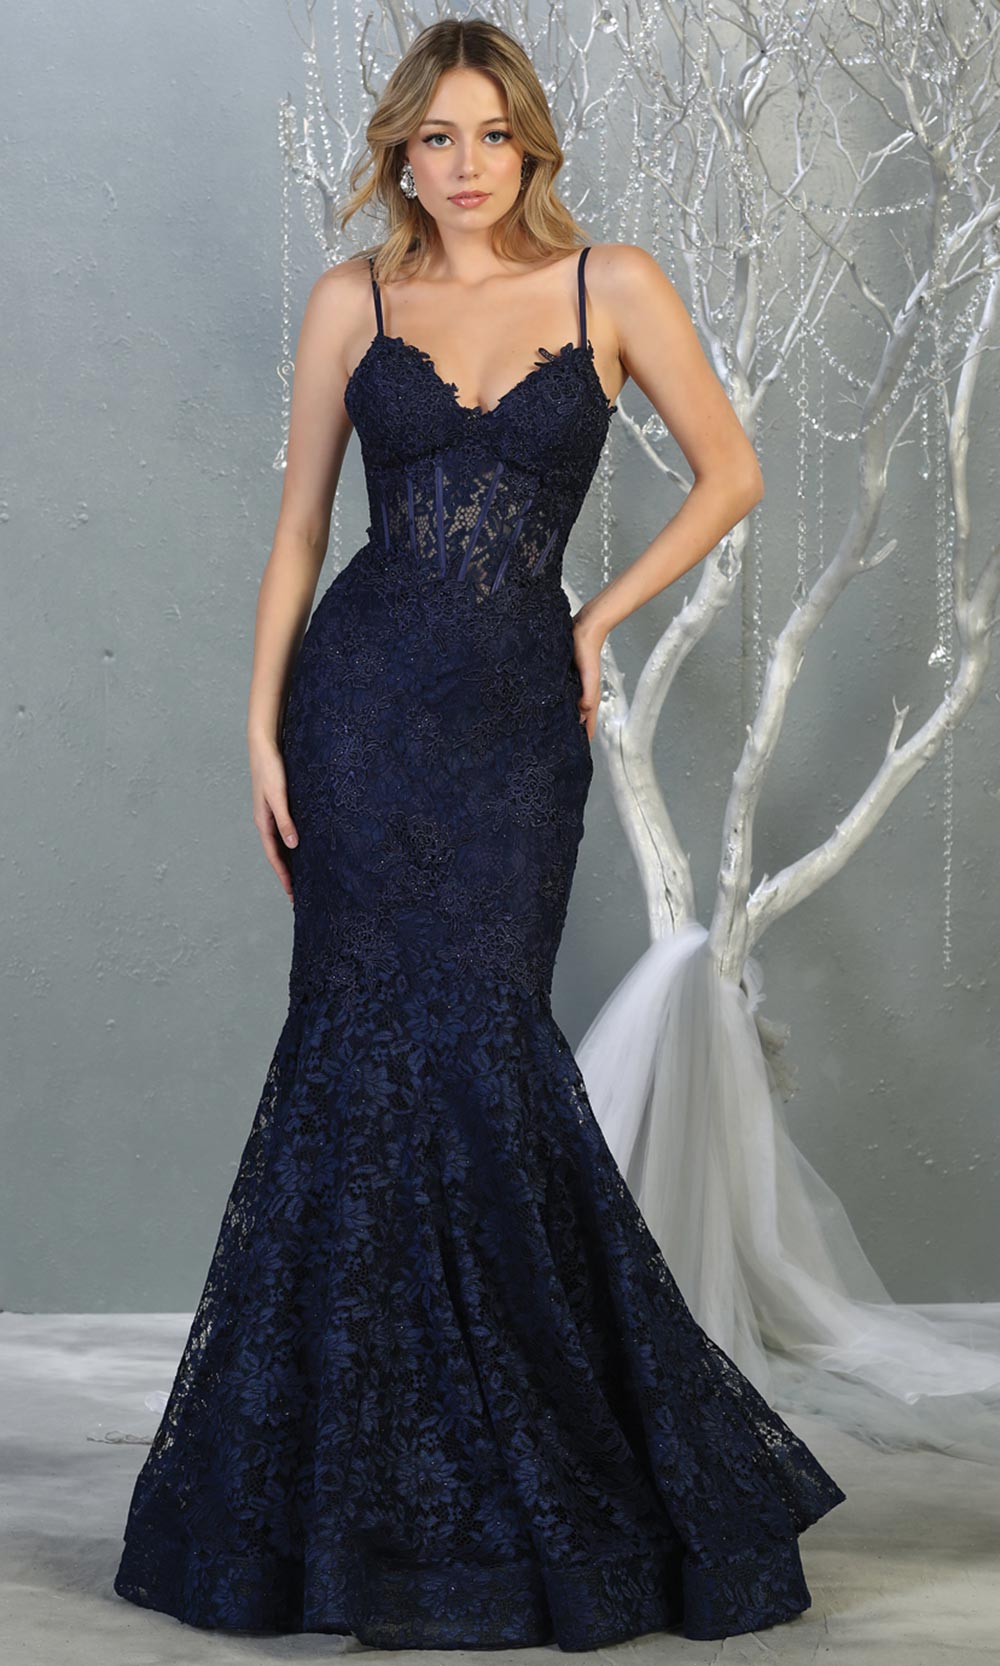 Mayqueen RQ7865 long navy blue v neck evening mermaid dress w/straps. Full length dark blue lace gown is perfect for  enagagement/e-shoot dress, formal wedding guest, evening party dress, prom, engagement, wedding reception. Plus sizes avail.jpg